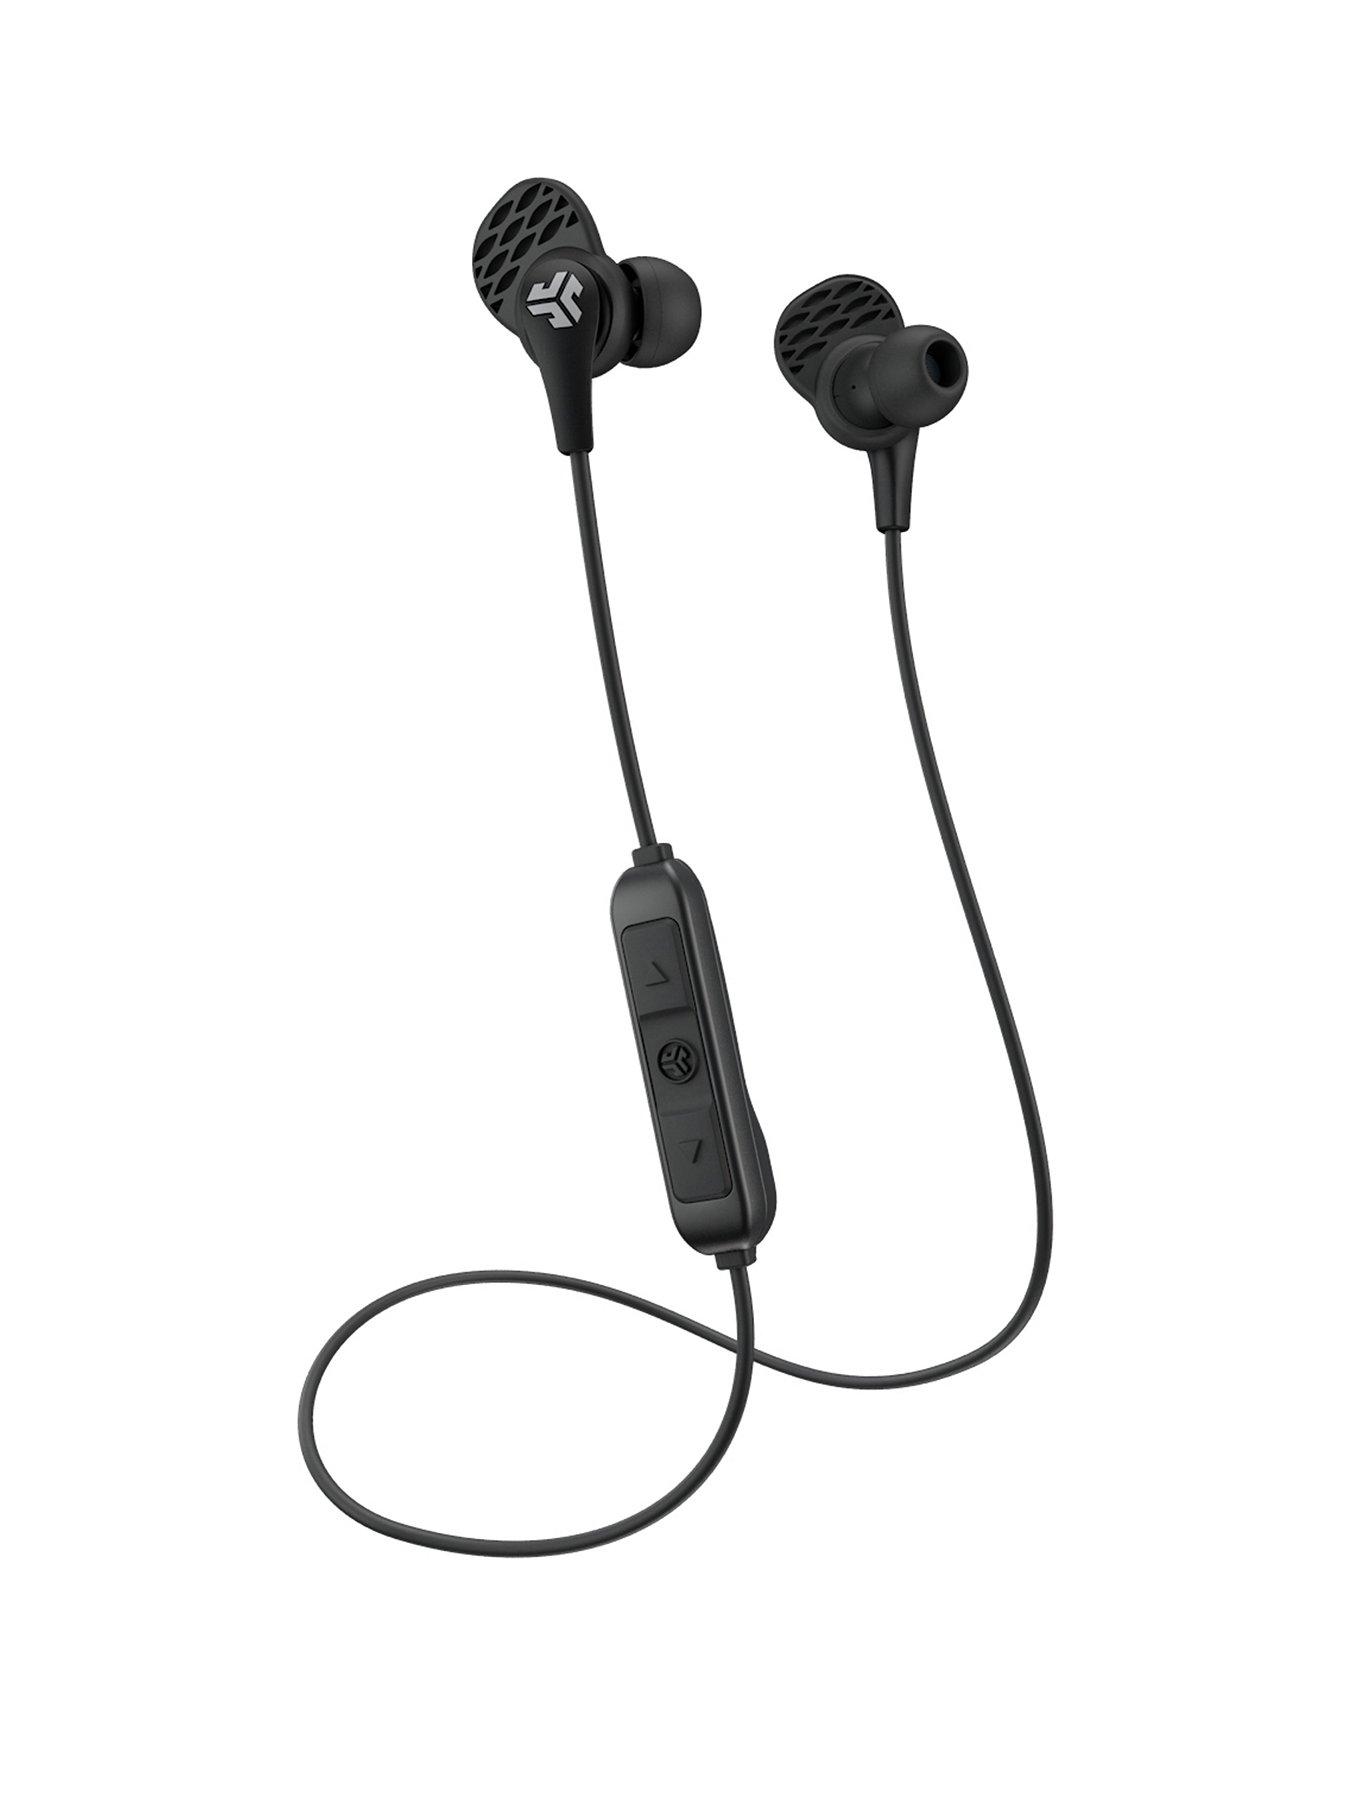 Jlab Jbuds Pro Bluetooth Wireless Earbuds With Built In Mic/Controls